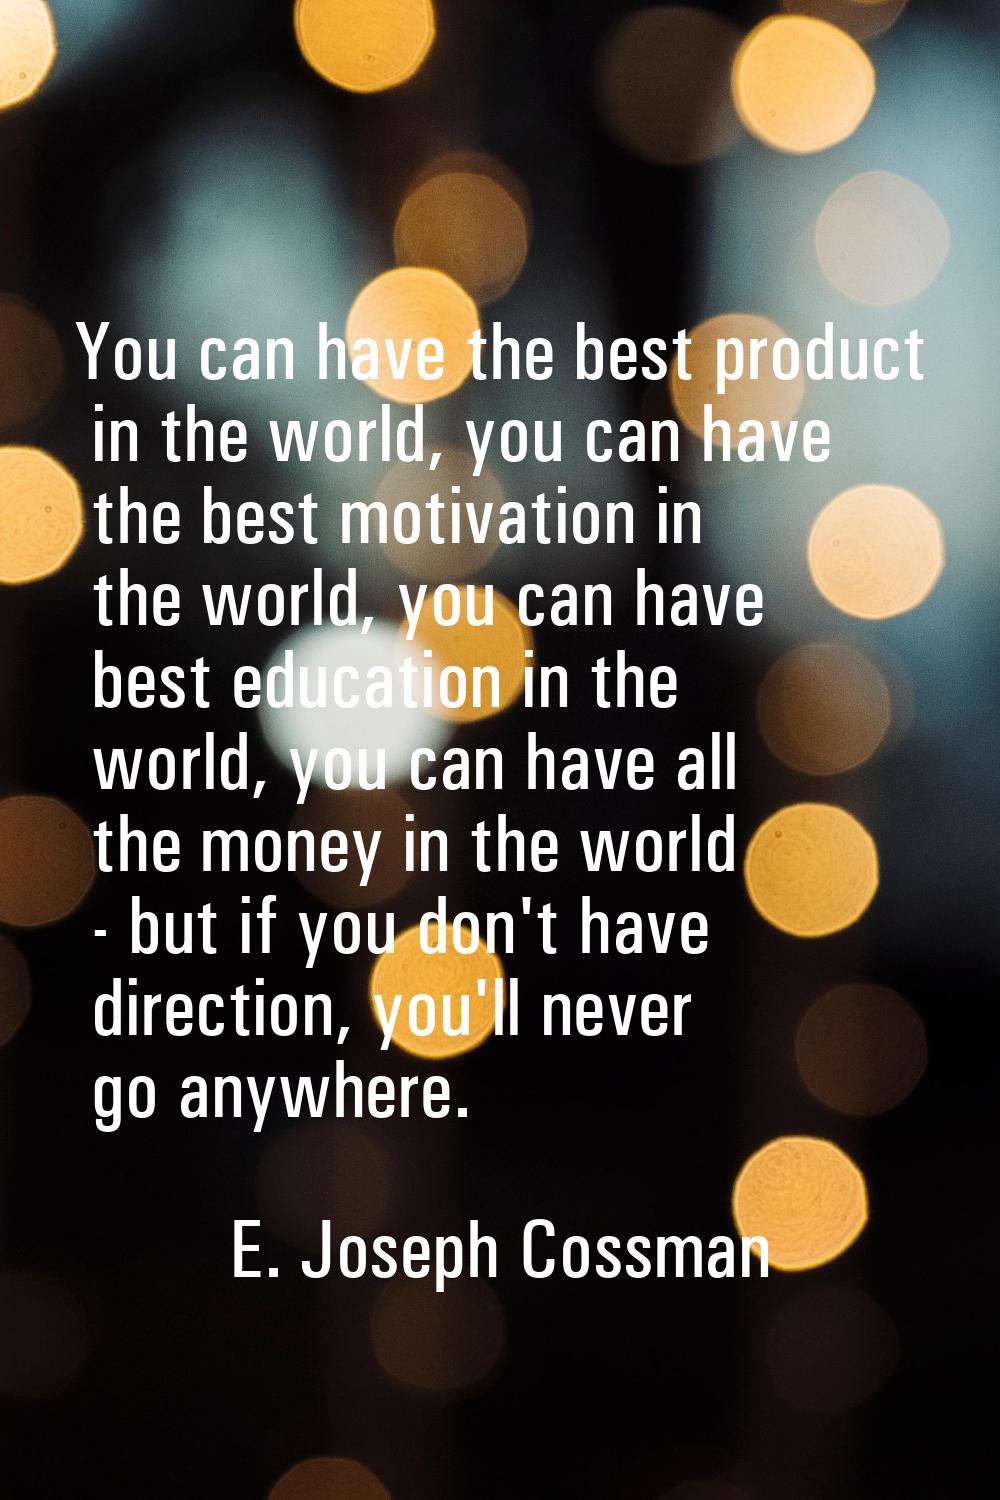 You can have the best product in the world, you can have the best motivation in the world, you can 